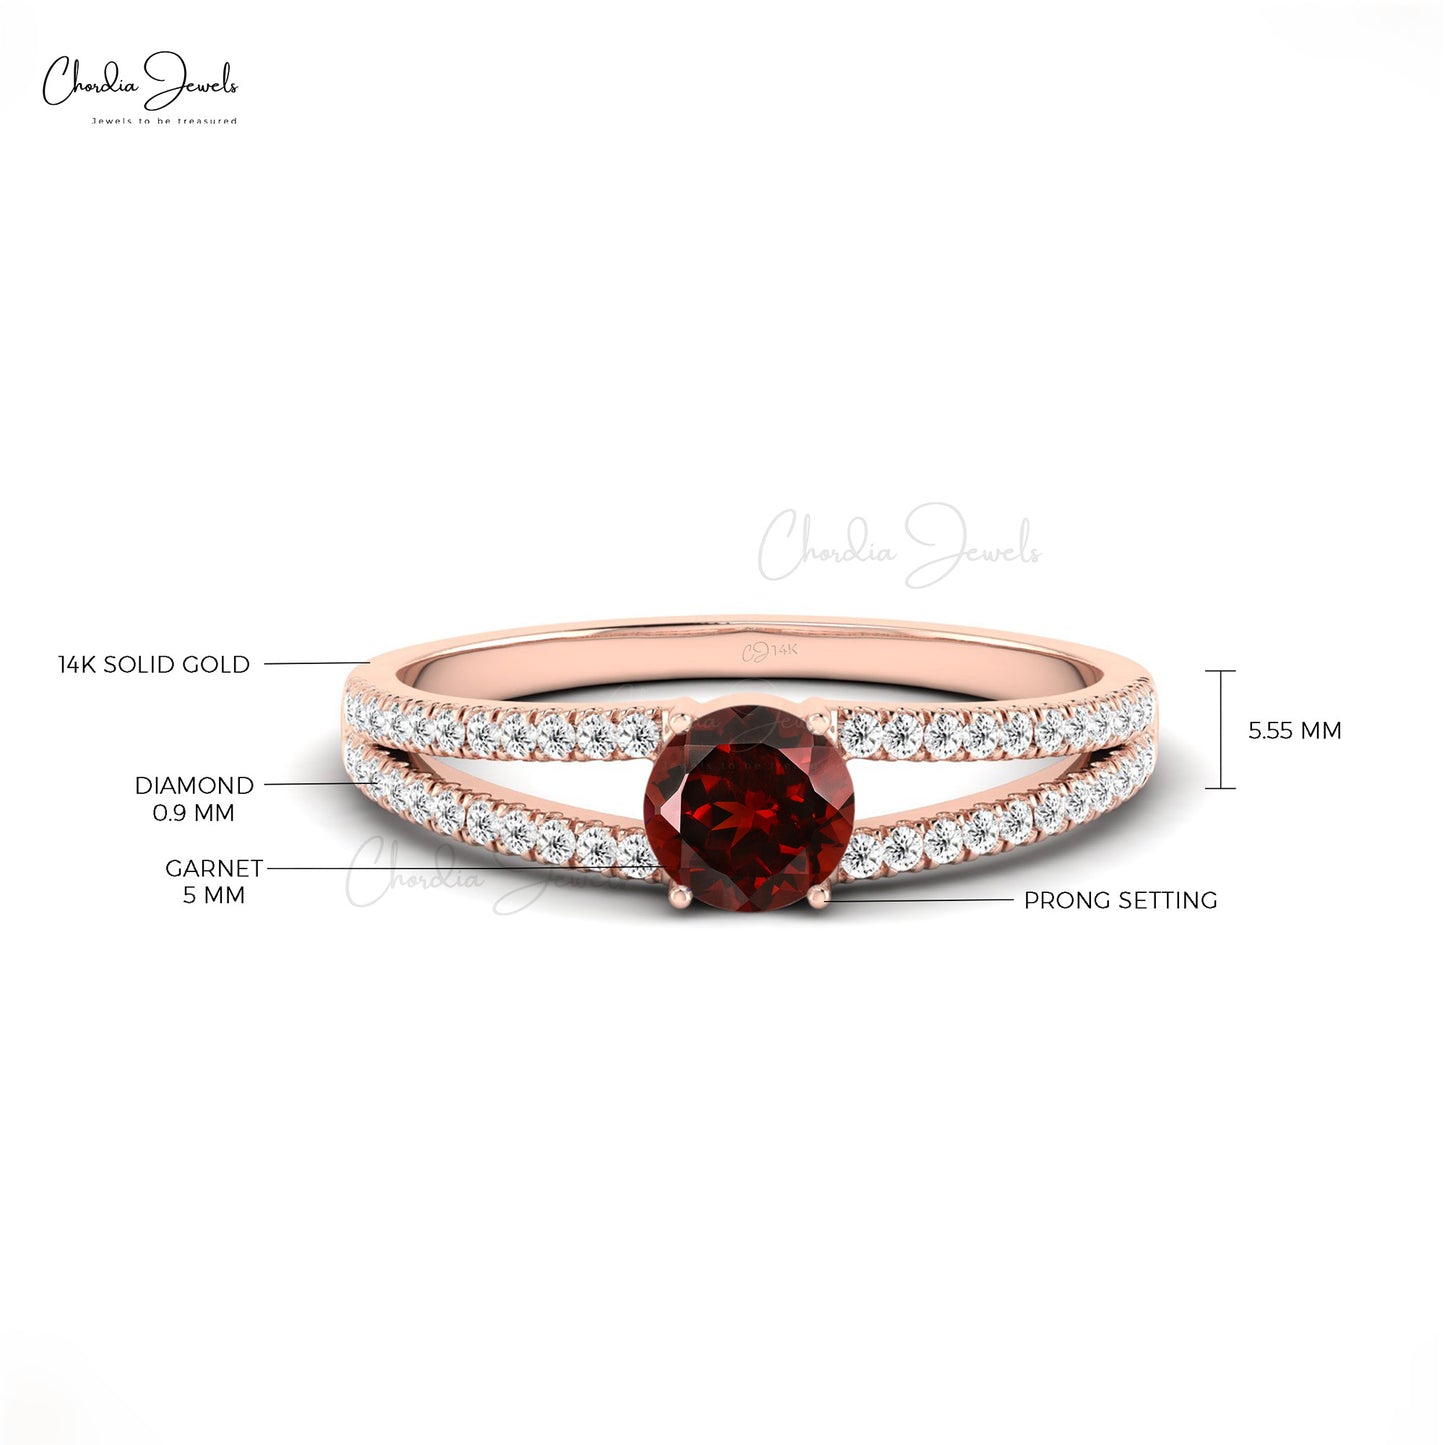 Garnet Solitaire 14k Gold Split Shank Engagement Ring with Diamond Accents